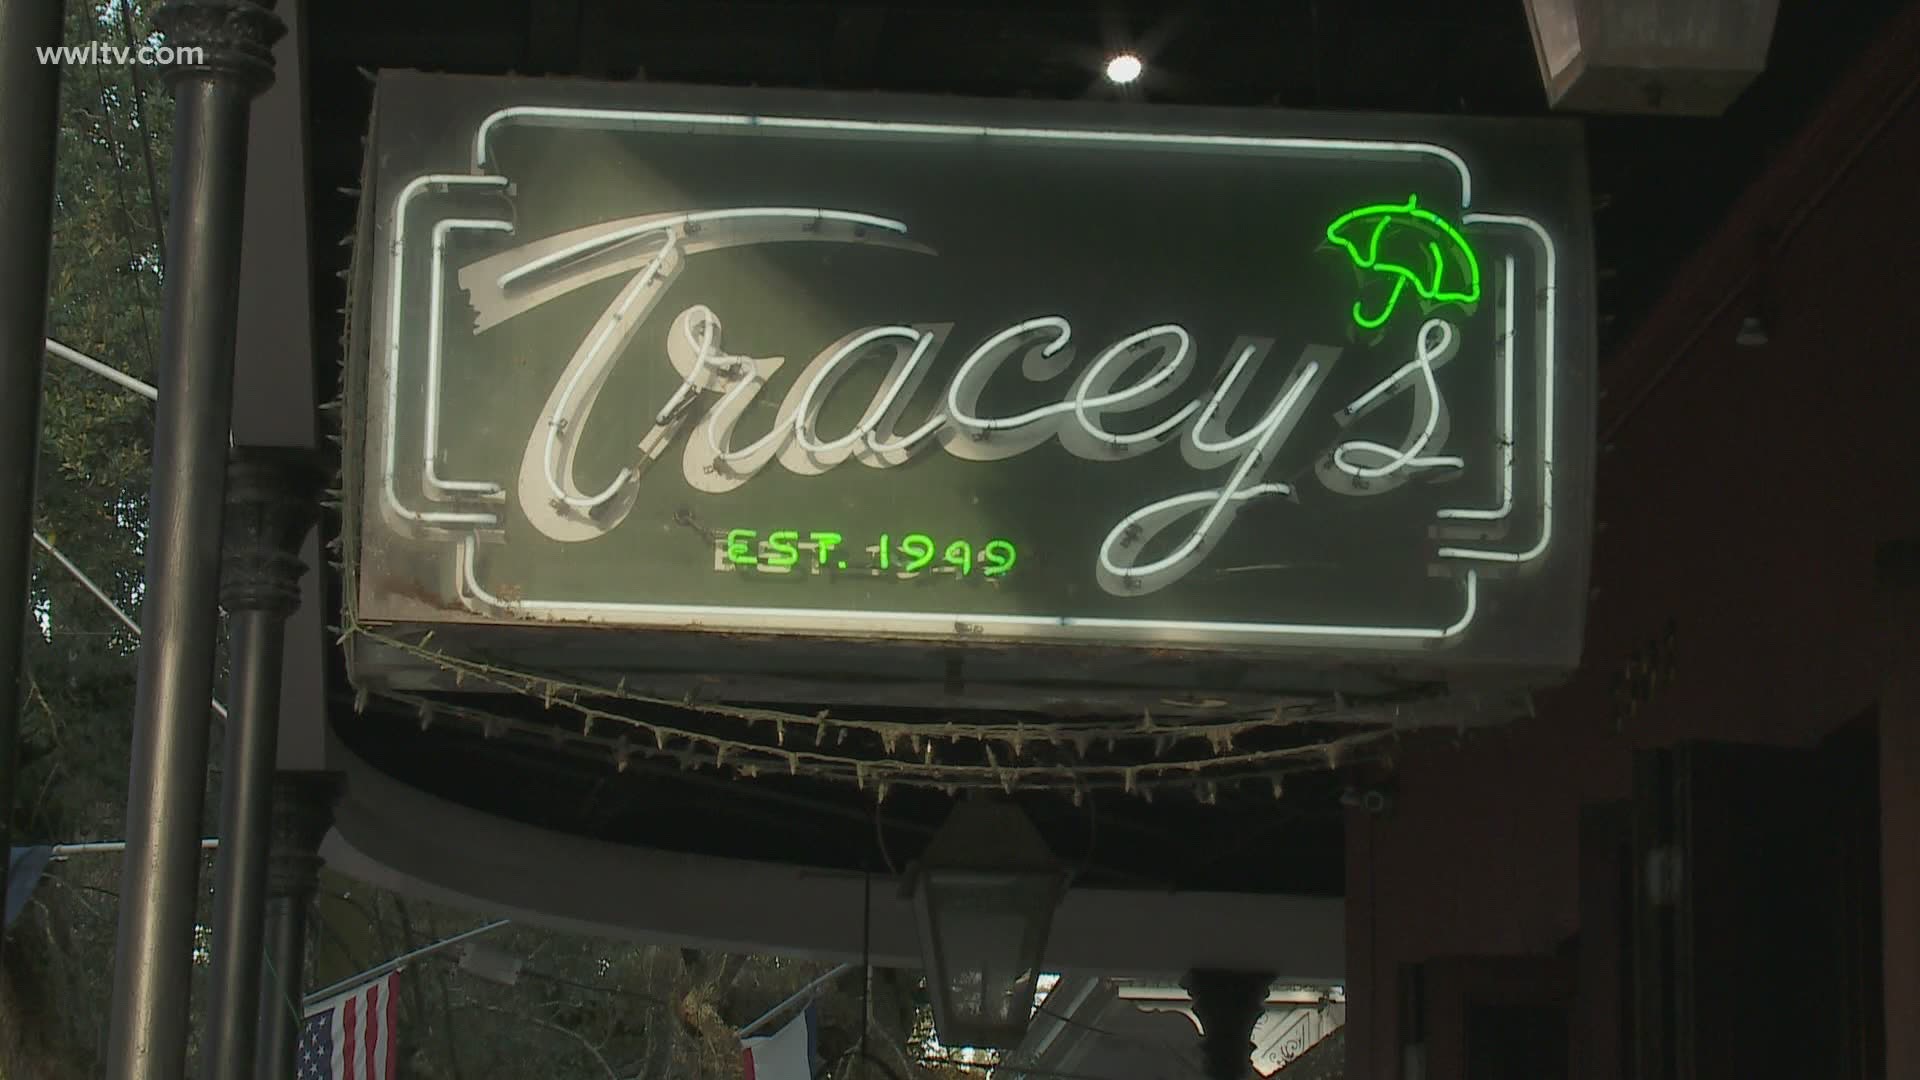 Tracey’s owner Jeff Carreras disputes that Tracey’s violated any guidelines when patrons gathered to watch Monday night’s Saints game.